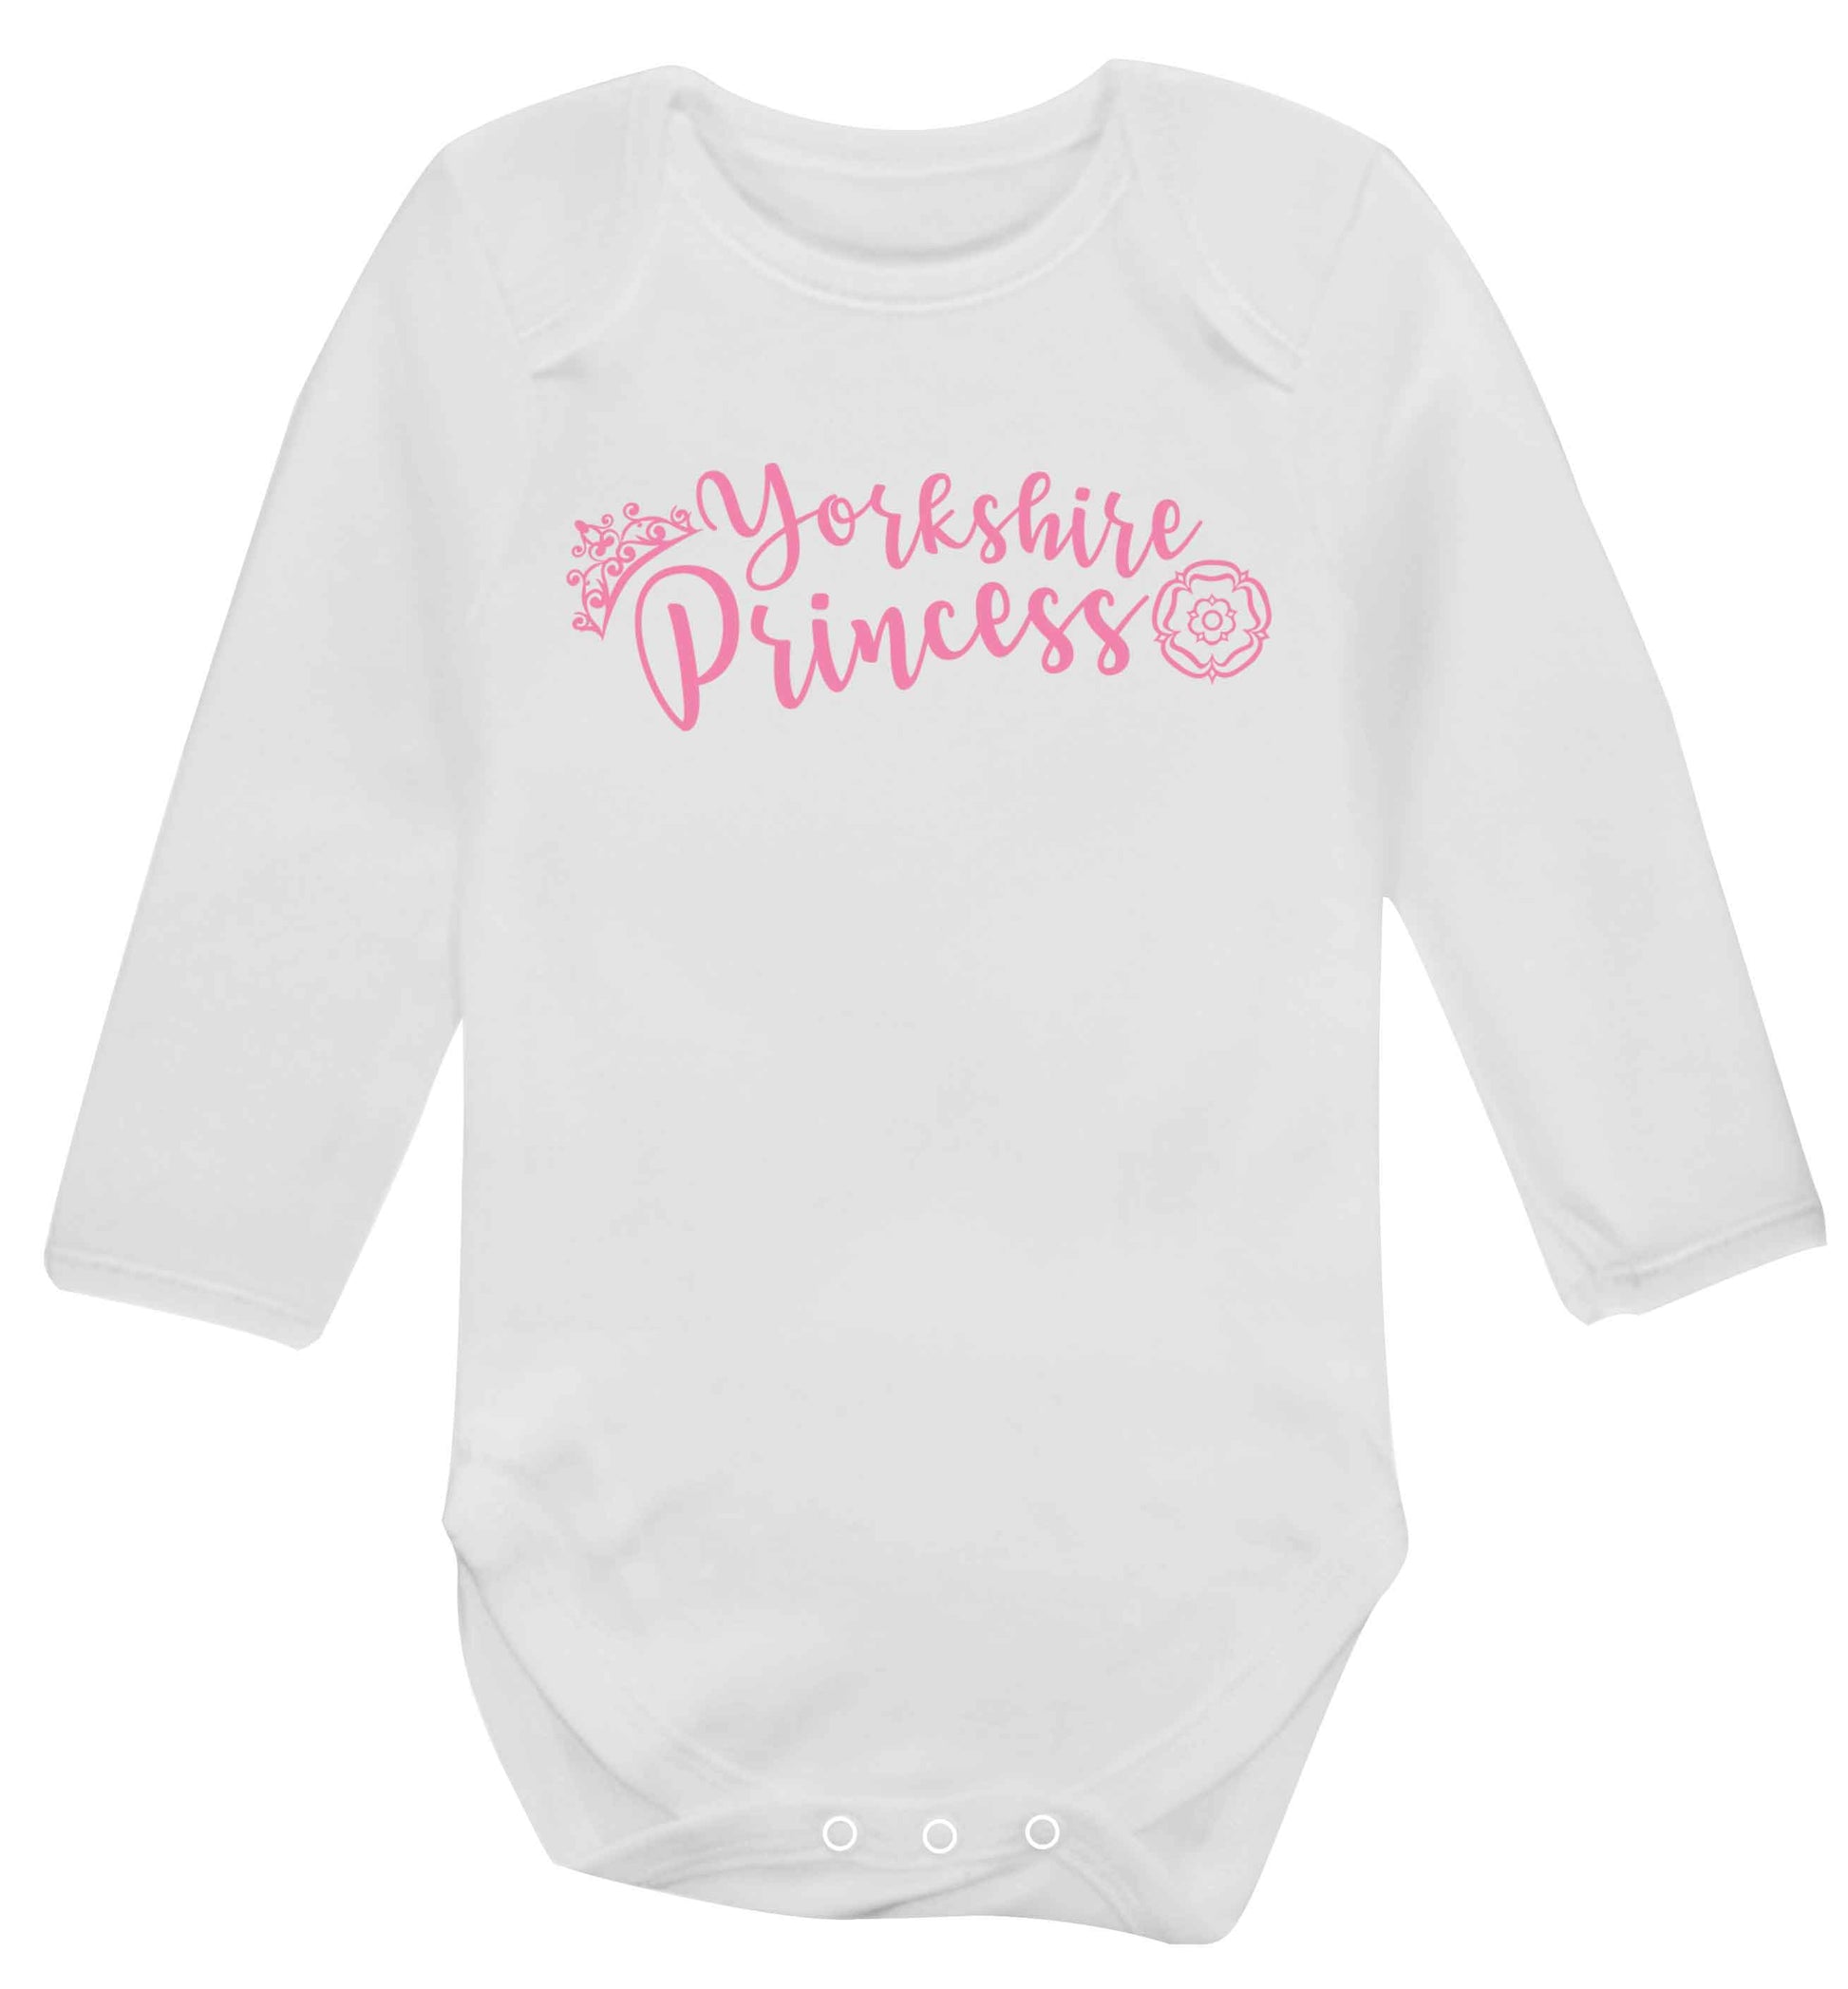 Yorkshire Princess Baby Vest long sleeved white 6-12 months